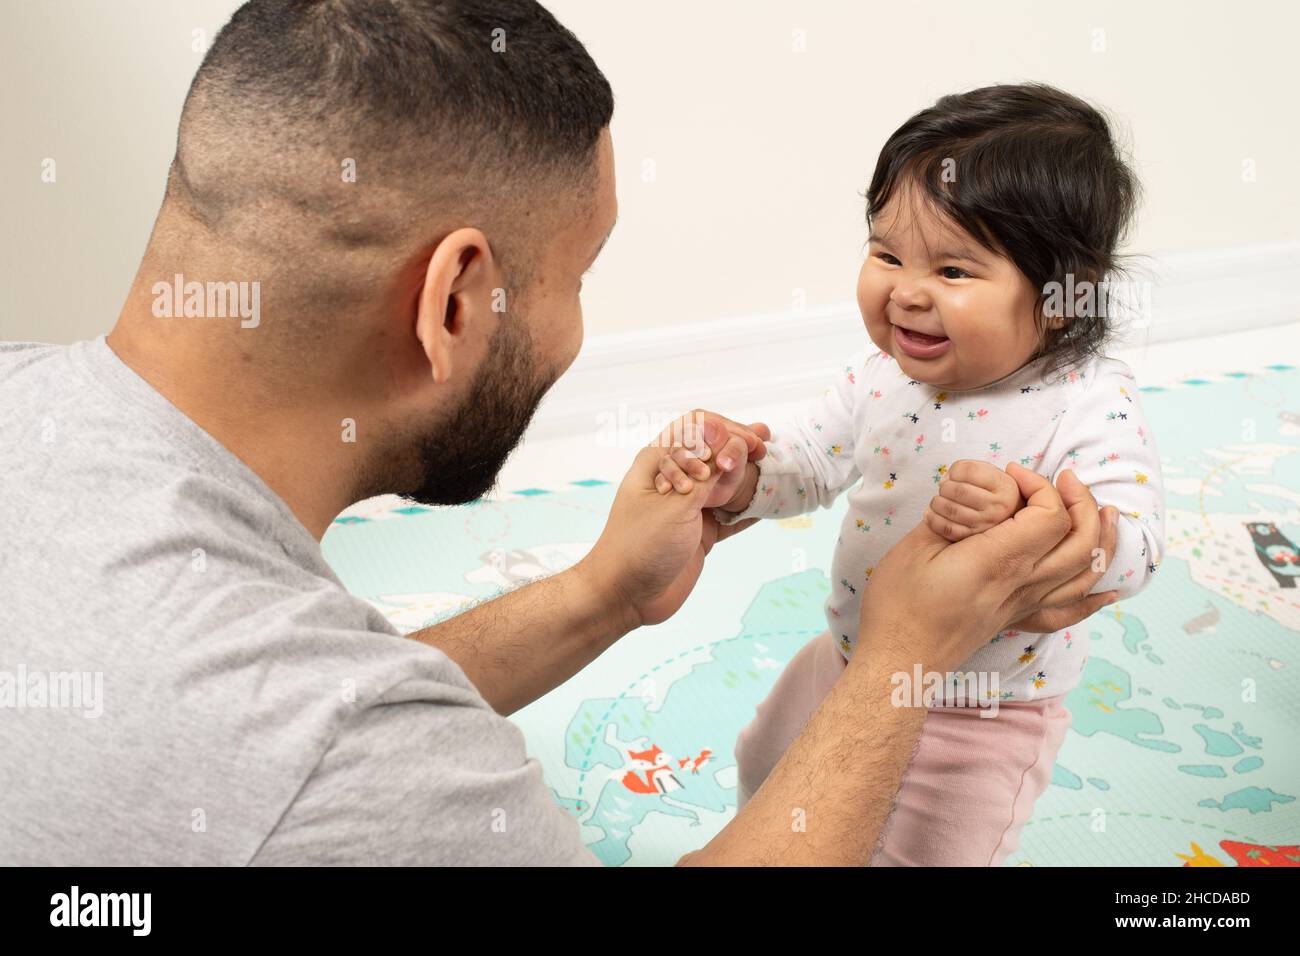 8 month old baby girl, interaction with father Stock Photo